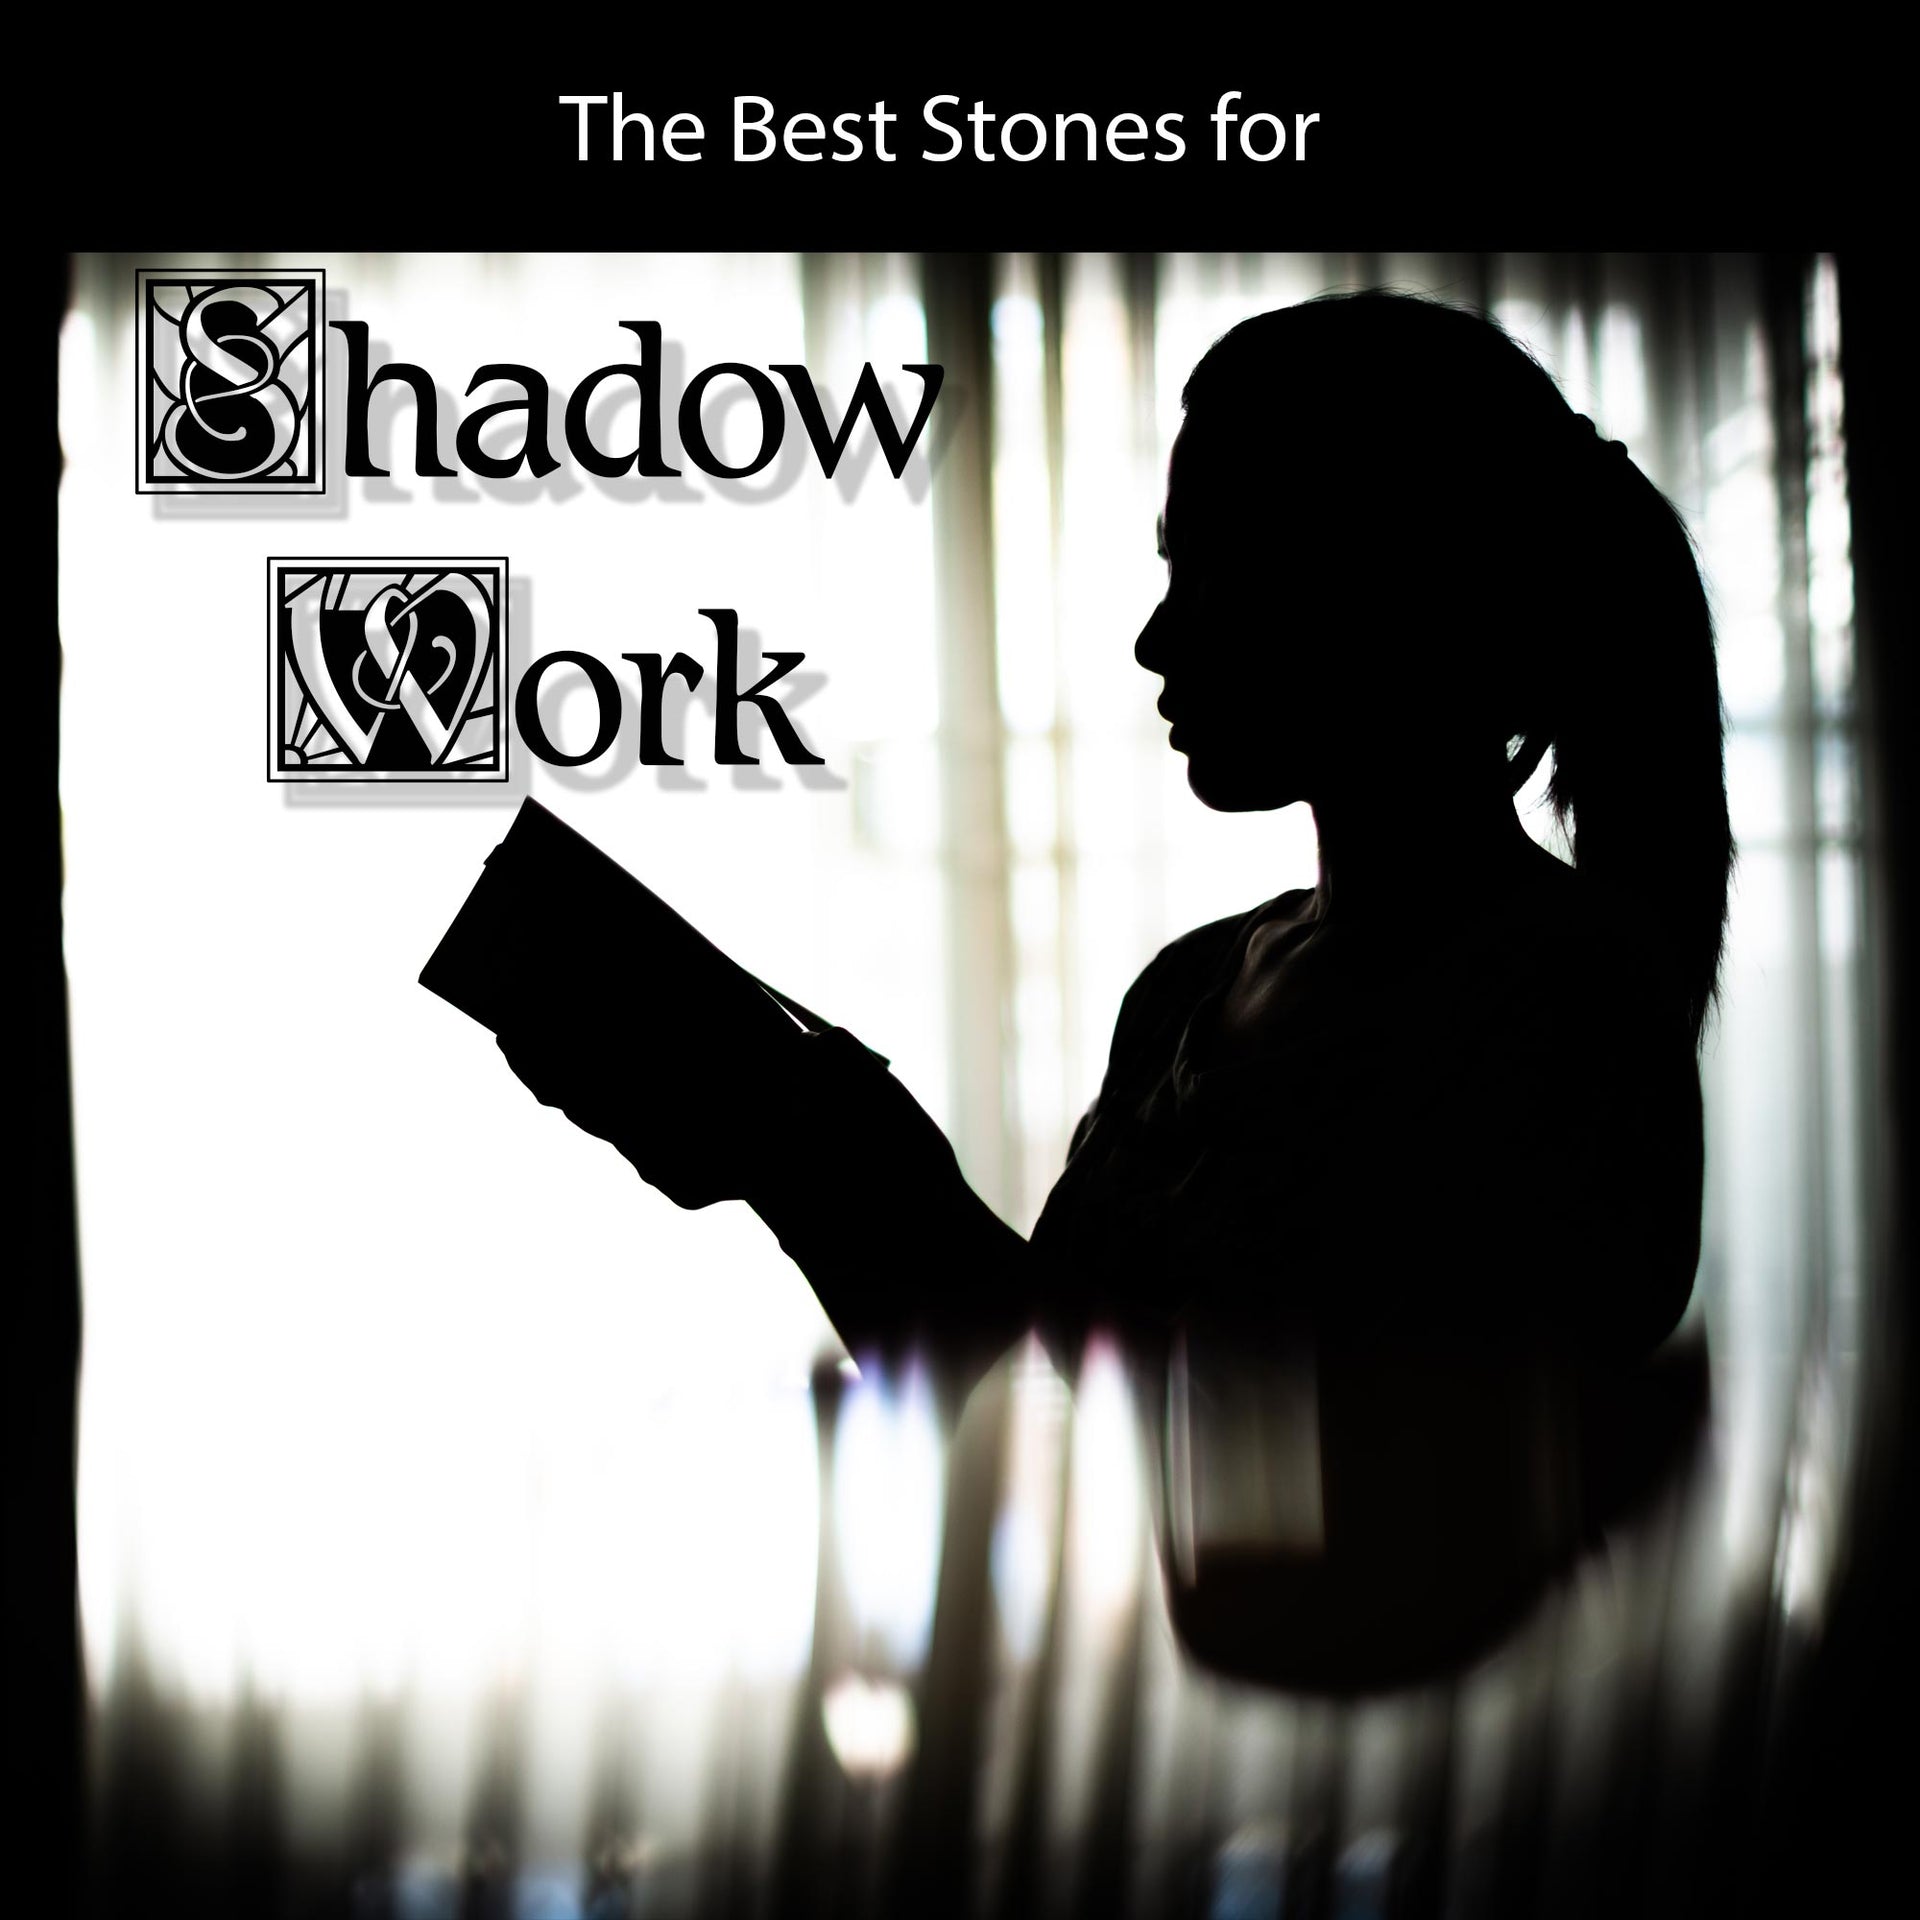 The Best Stones for Shadow Work